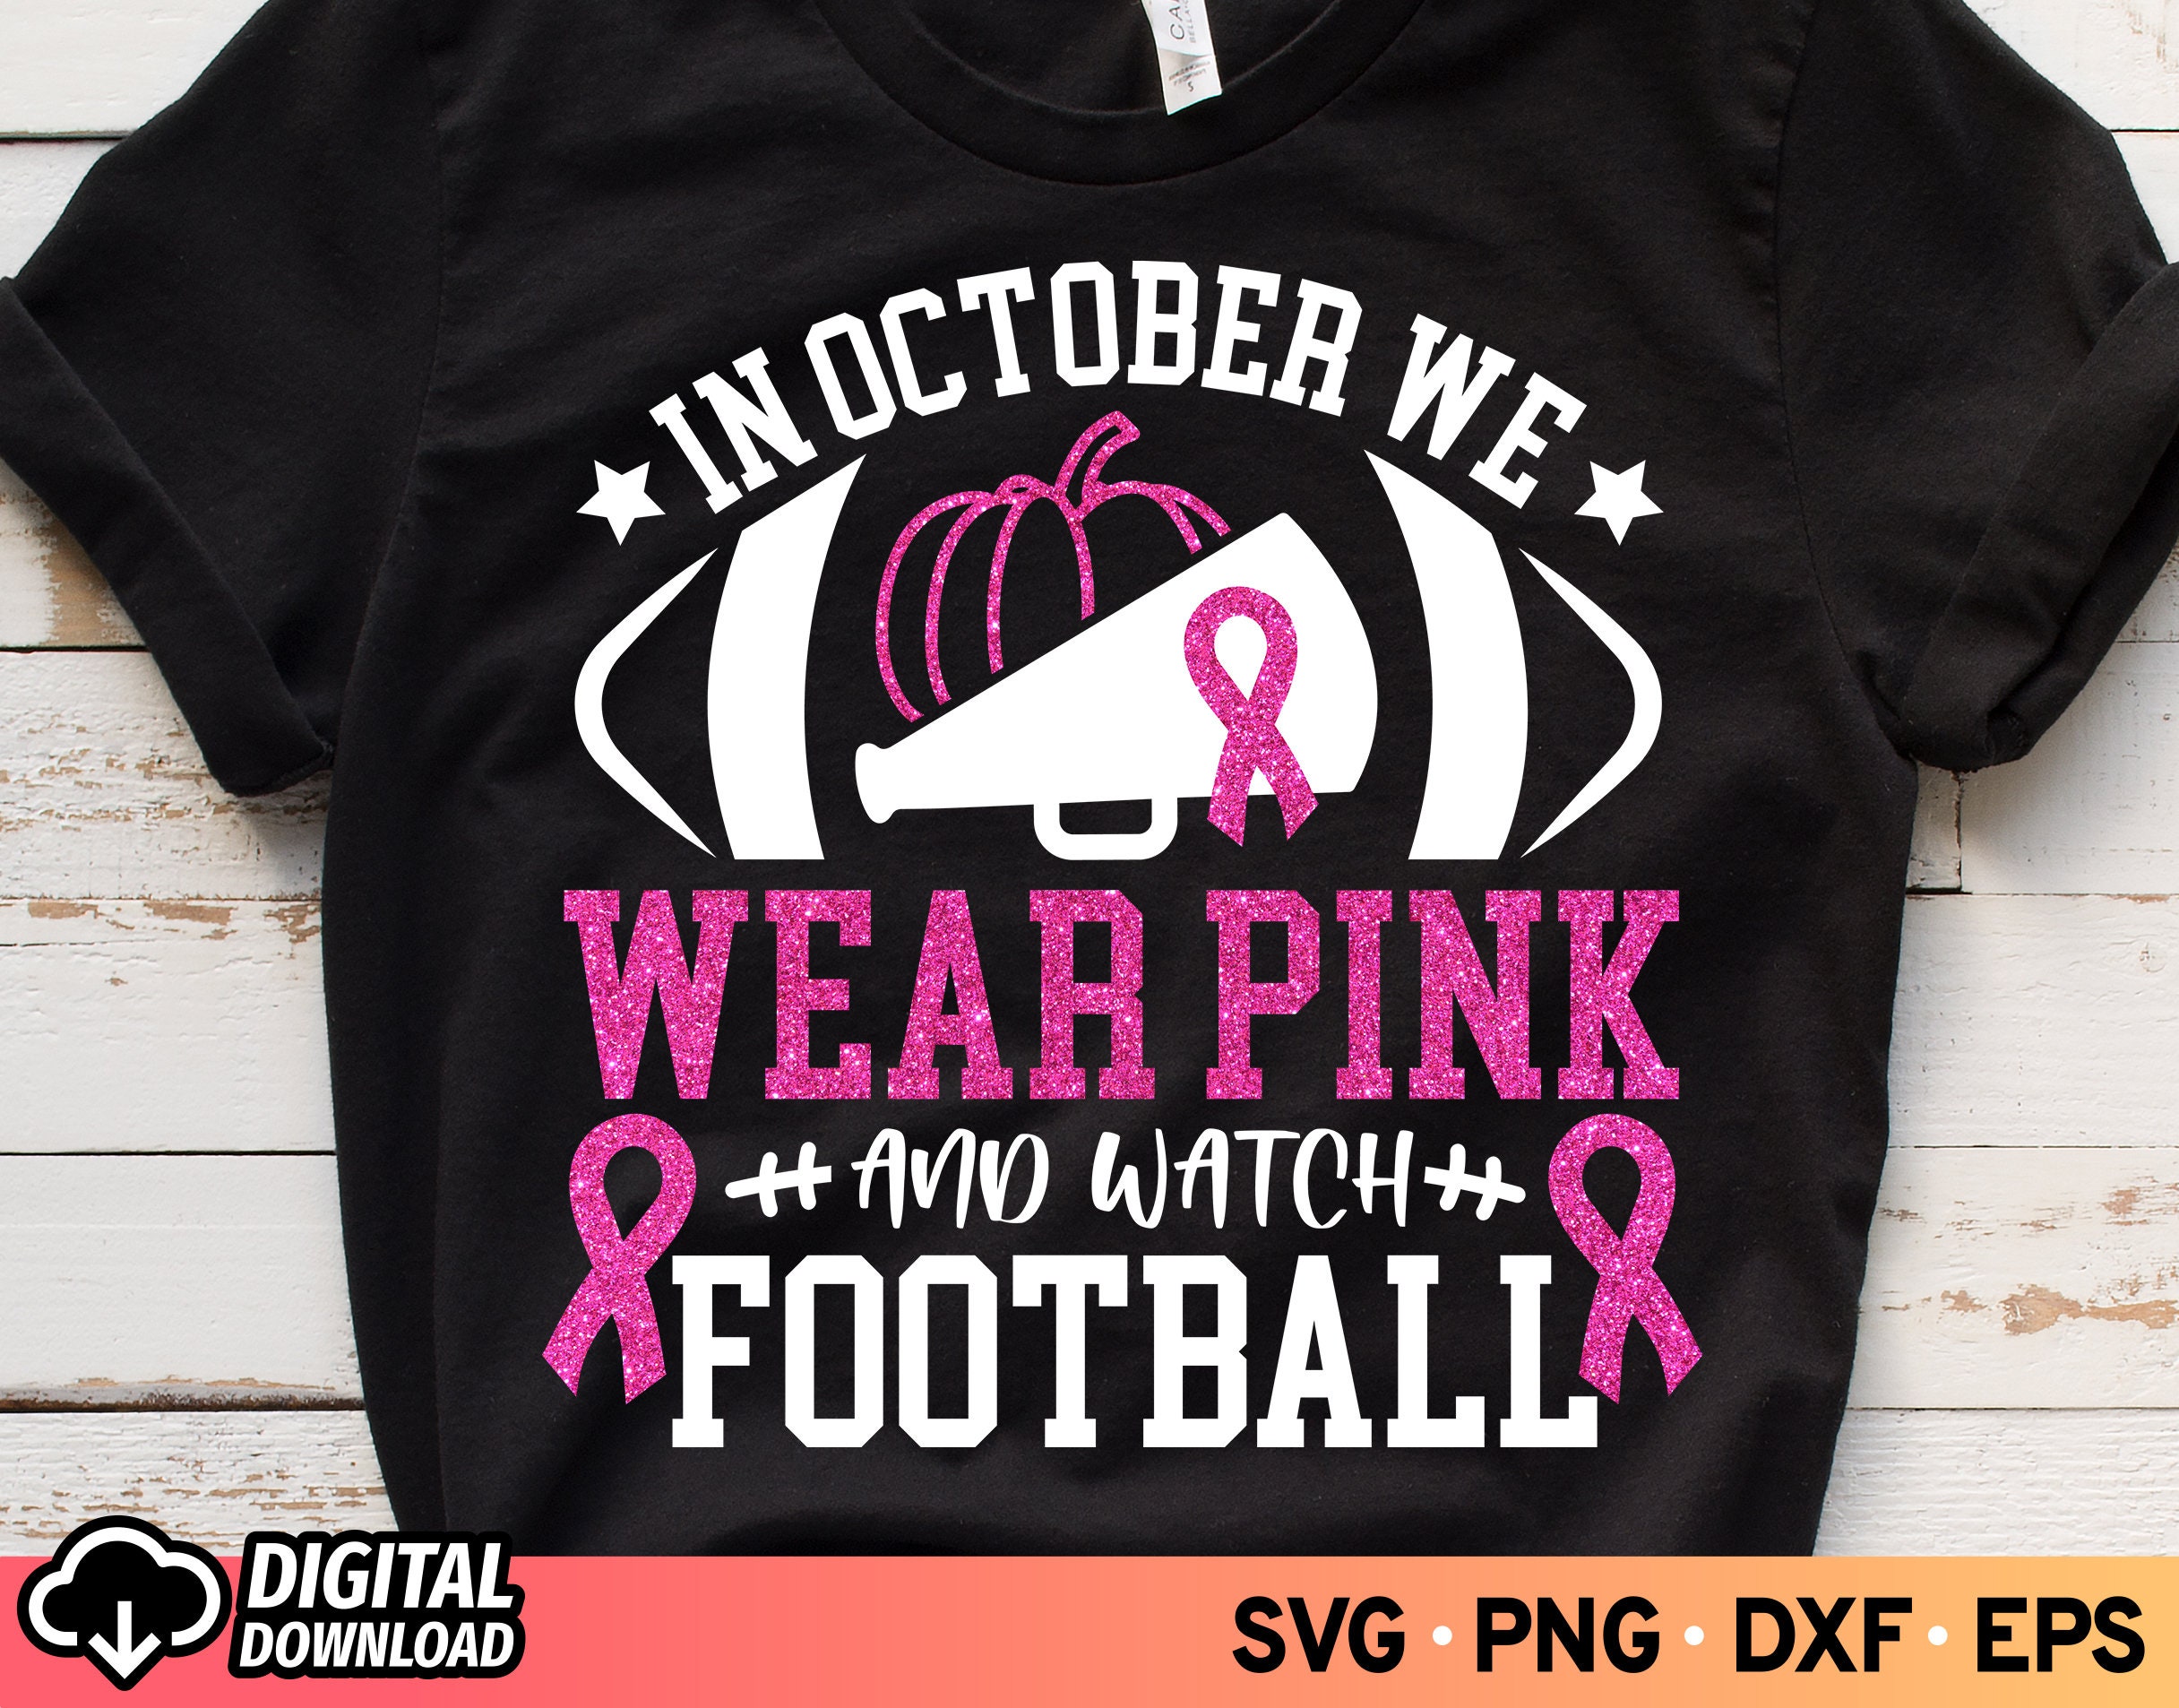 In October We Wear Pink and Watch Football Design SVG Fight - Etsy